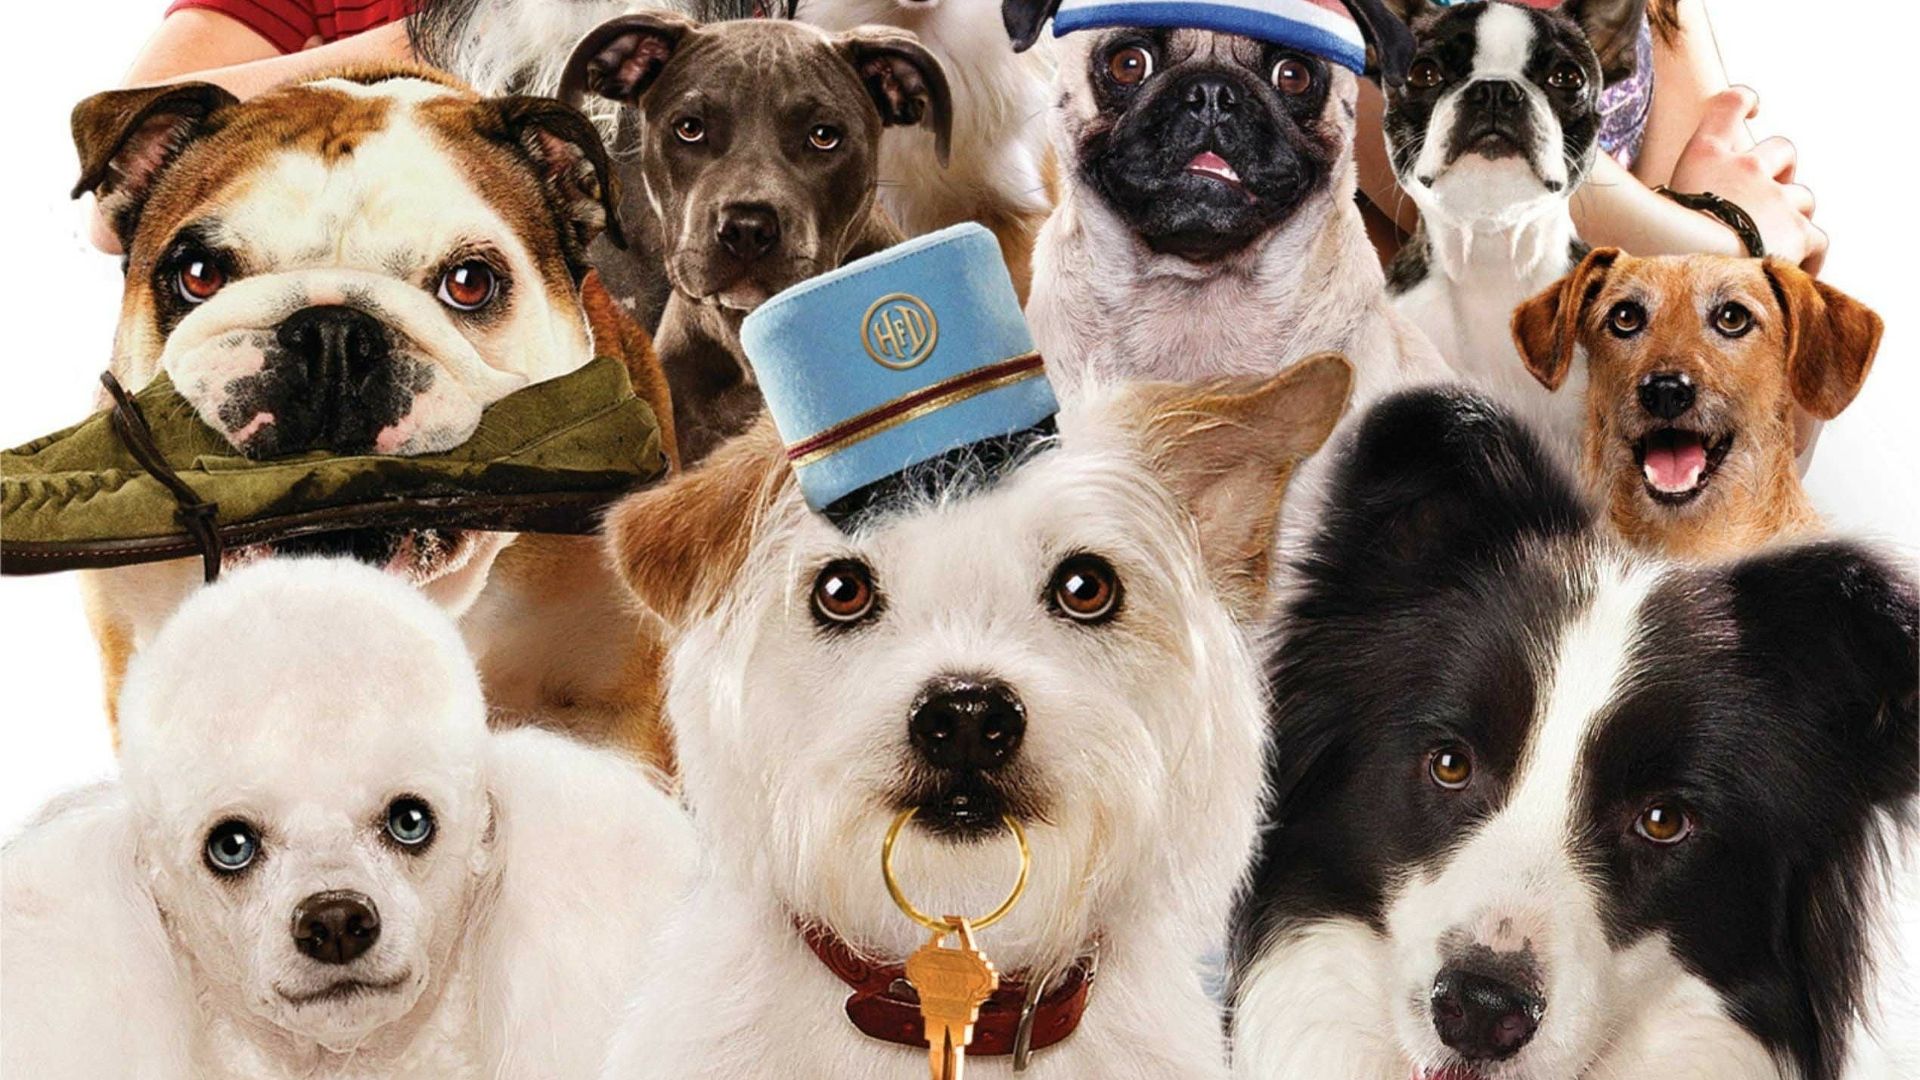 Hotel for Dogs background